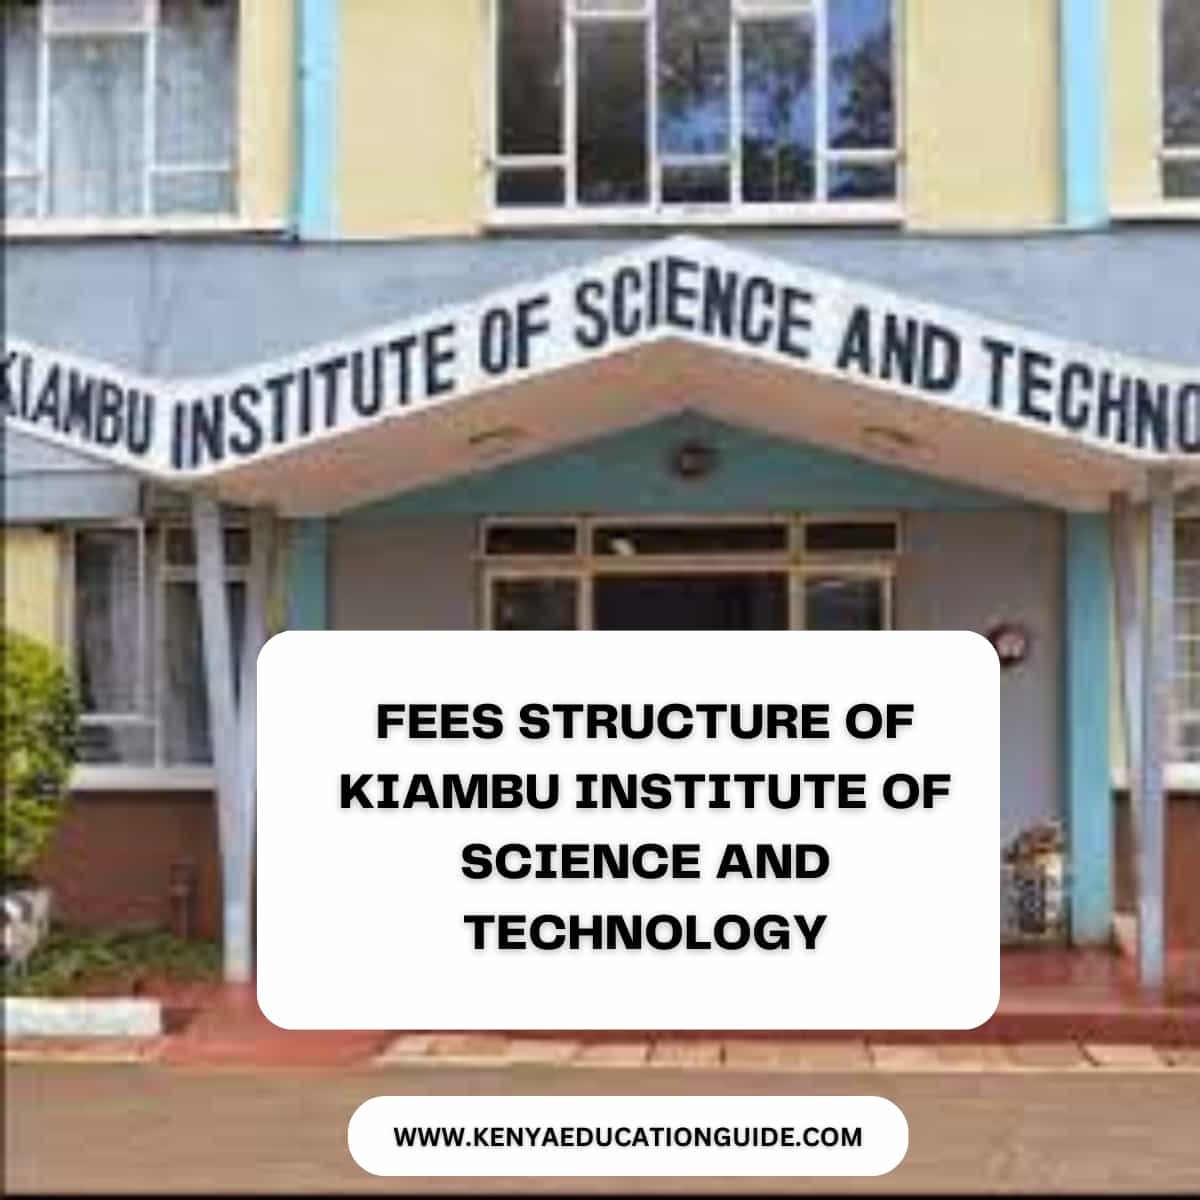 Fee Structure of Kiambu Institute of Science and Technology